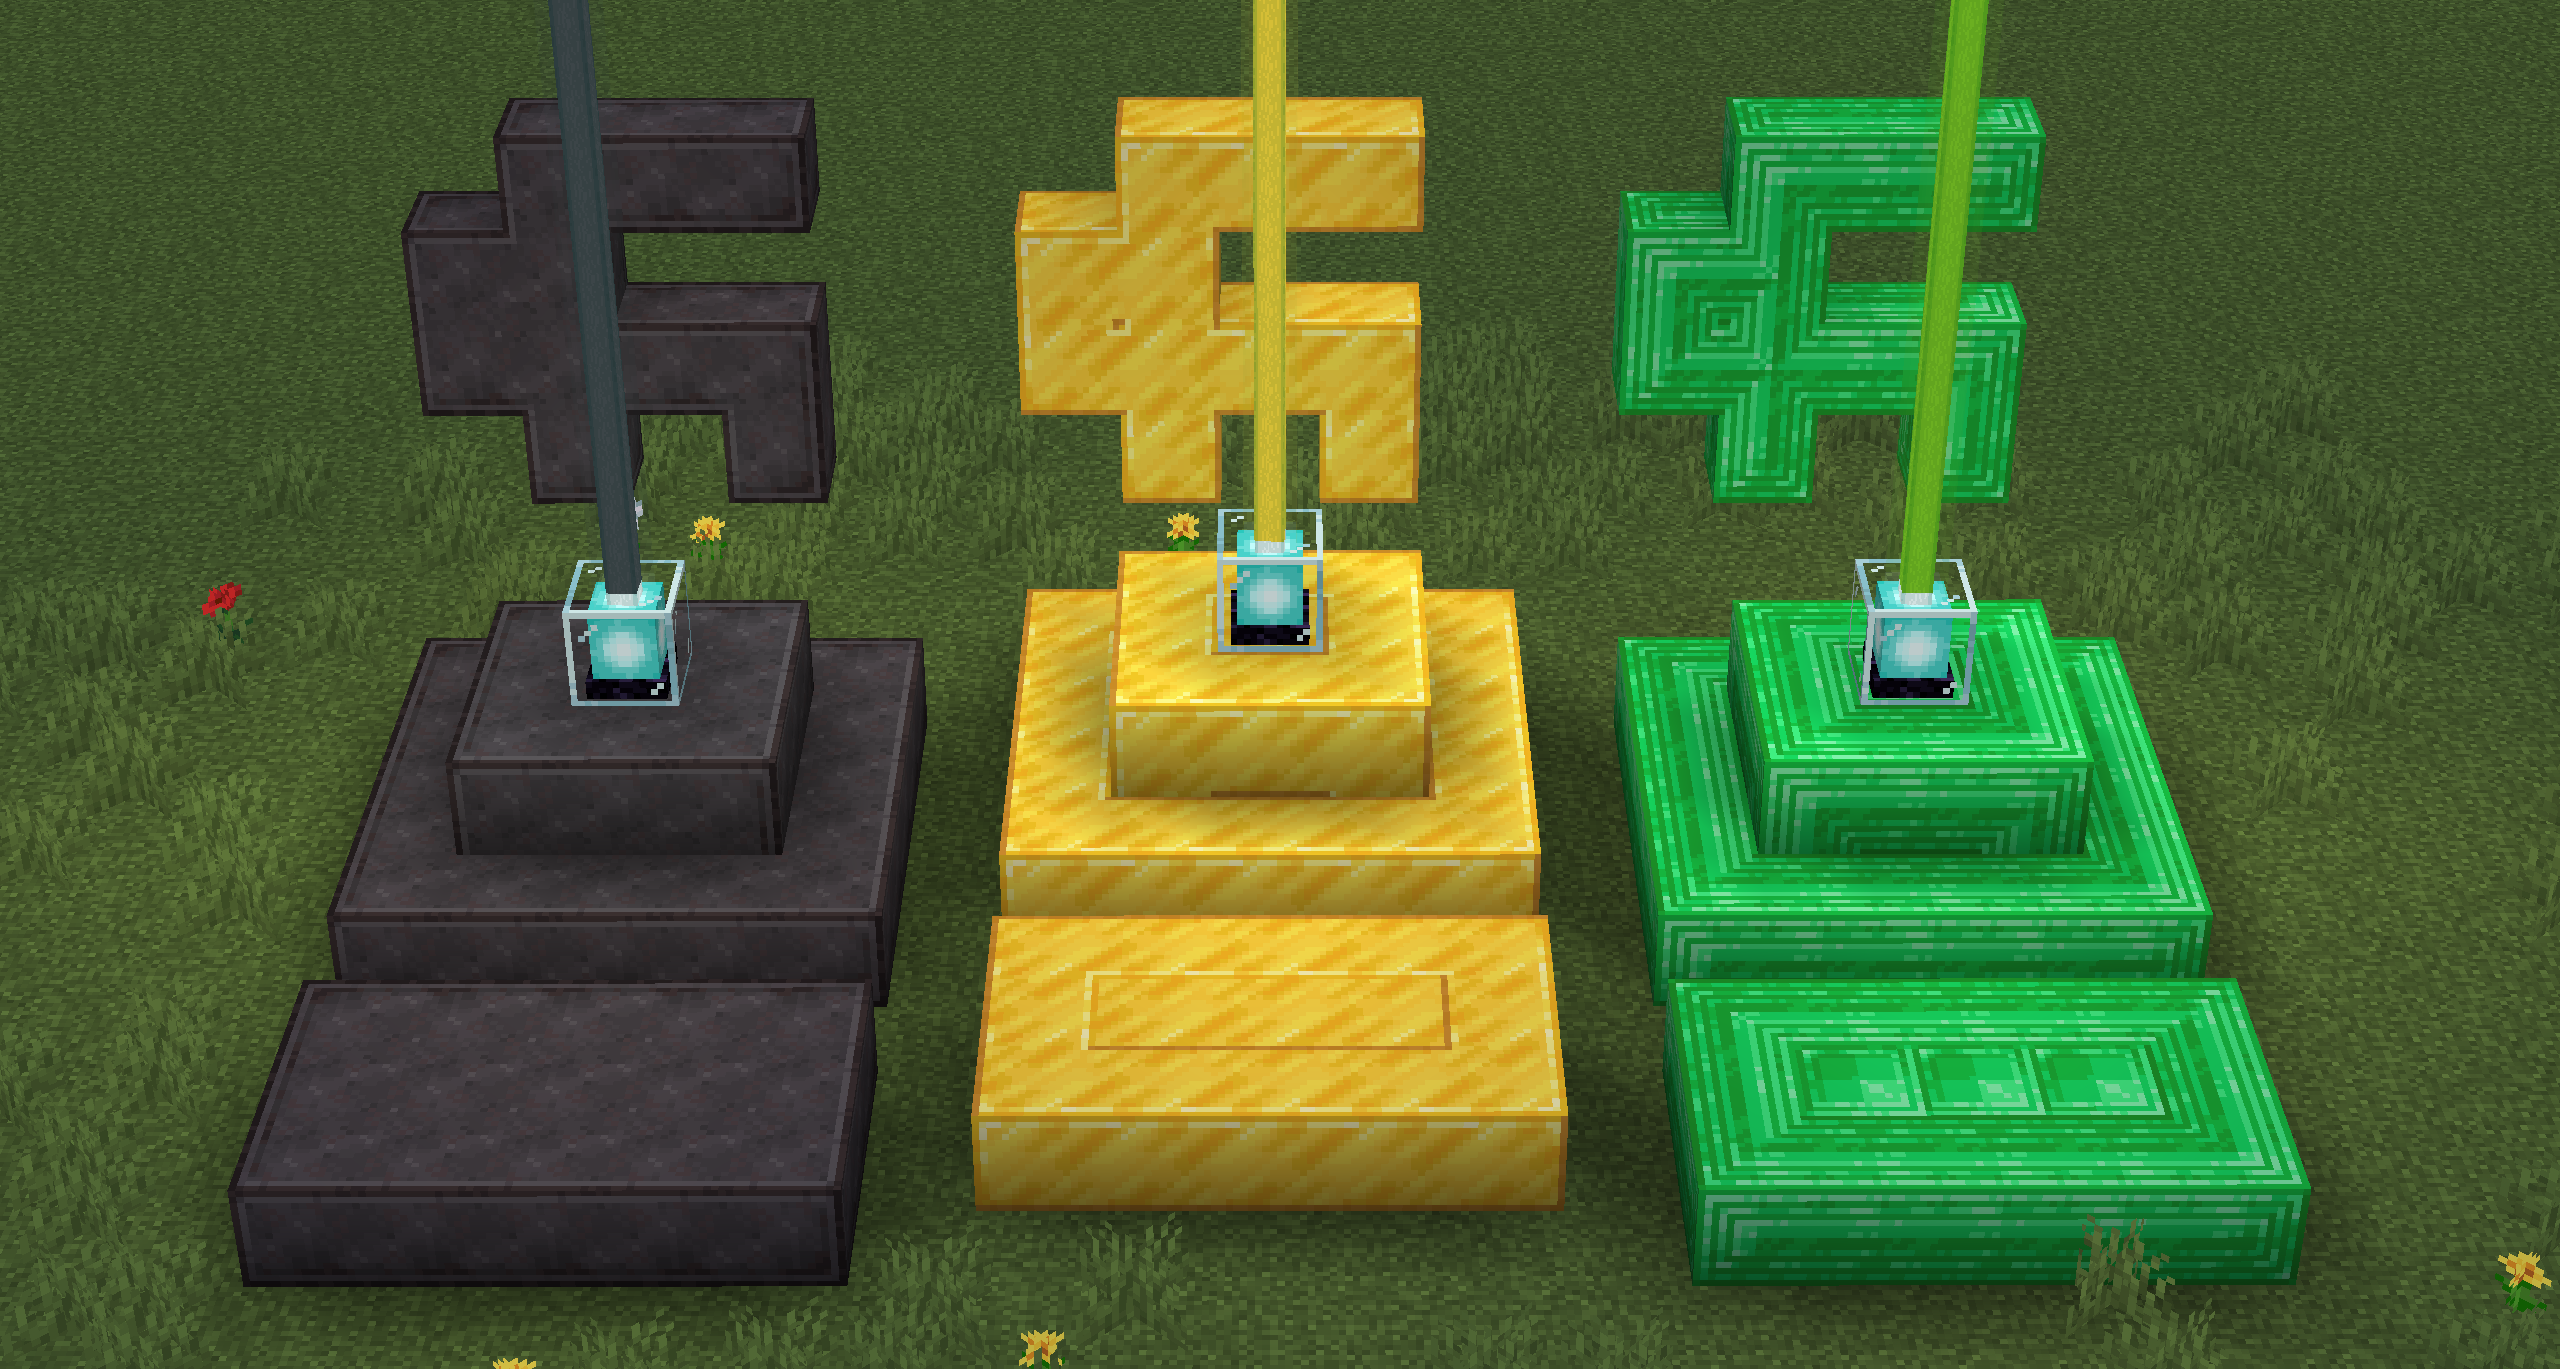 A showcase of the netherite, gold and emerald textures